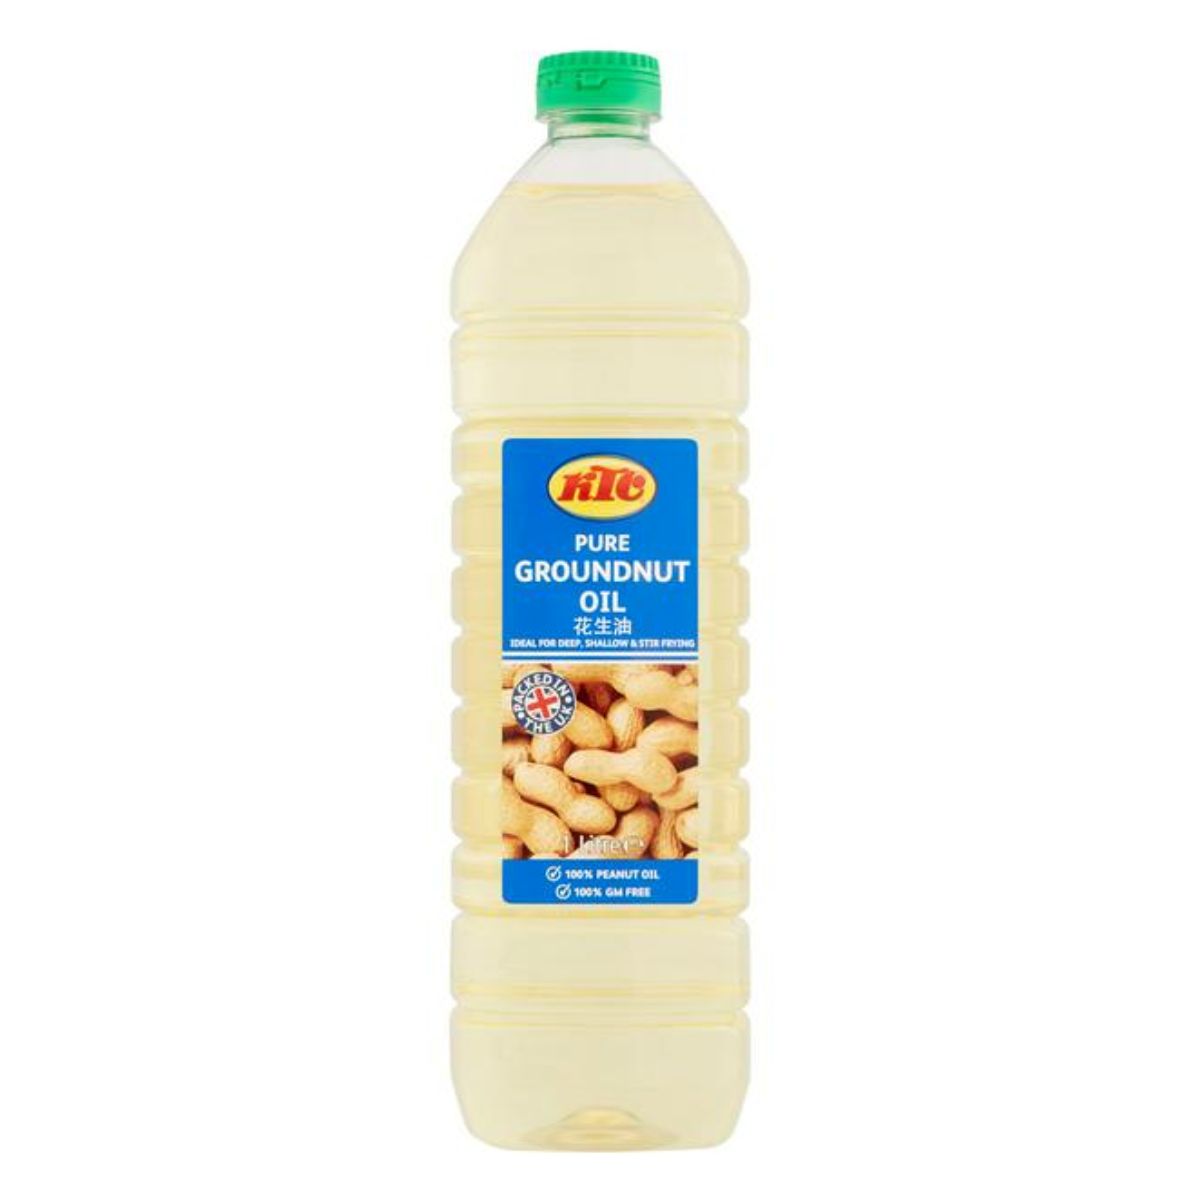 A bottle of KTC - Pure Groundnut Oil - 1L on a white background.